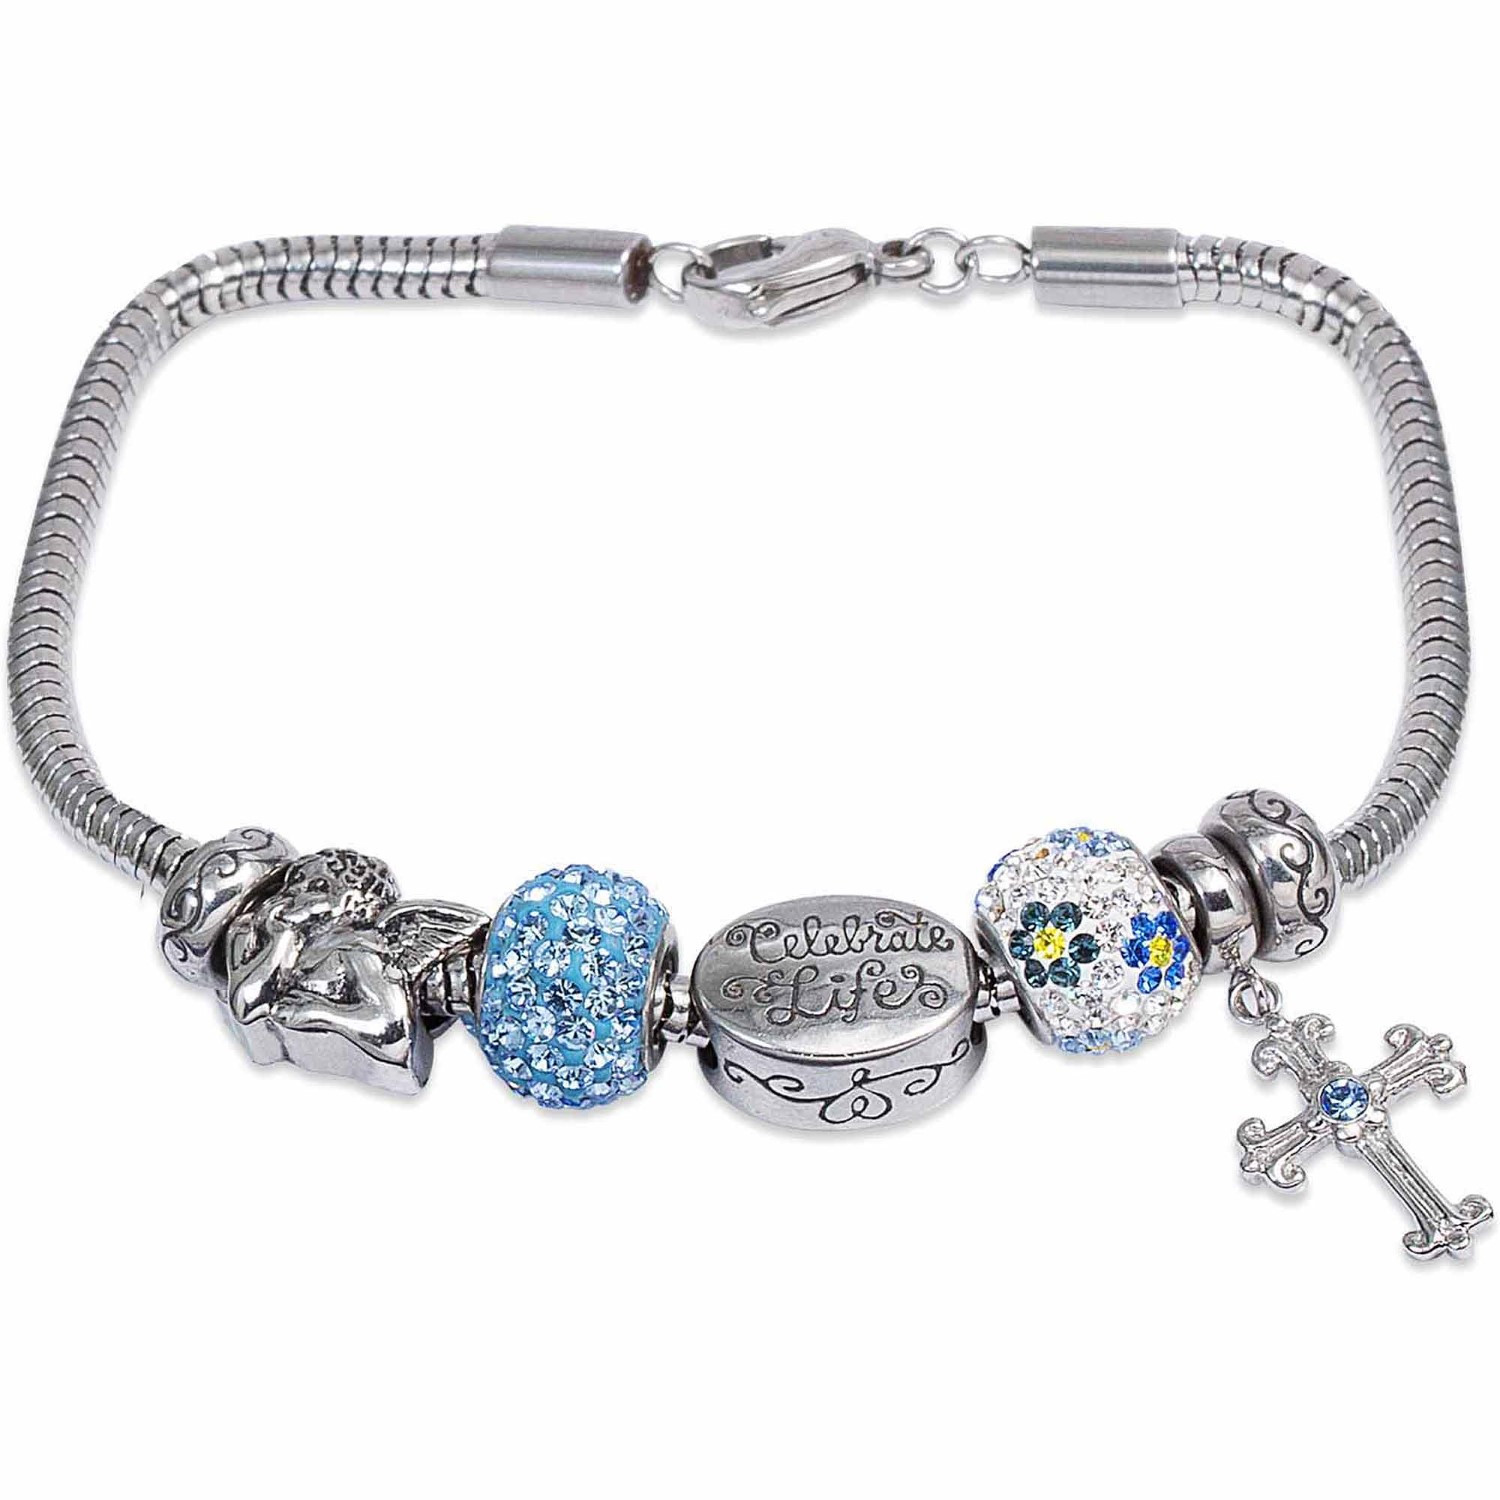 Hallmark Bracelet Charms
 Connections from Hallmark Stainless Steel Limited Edition